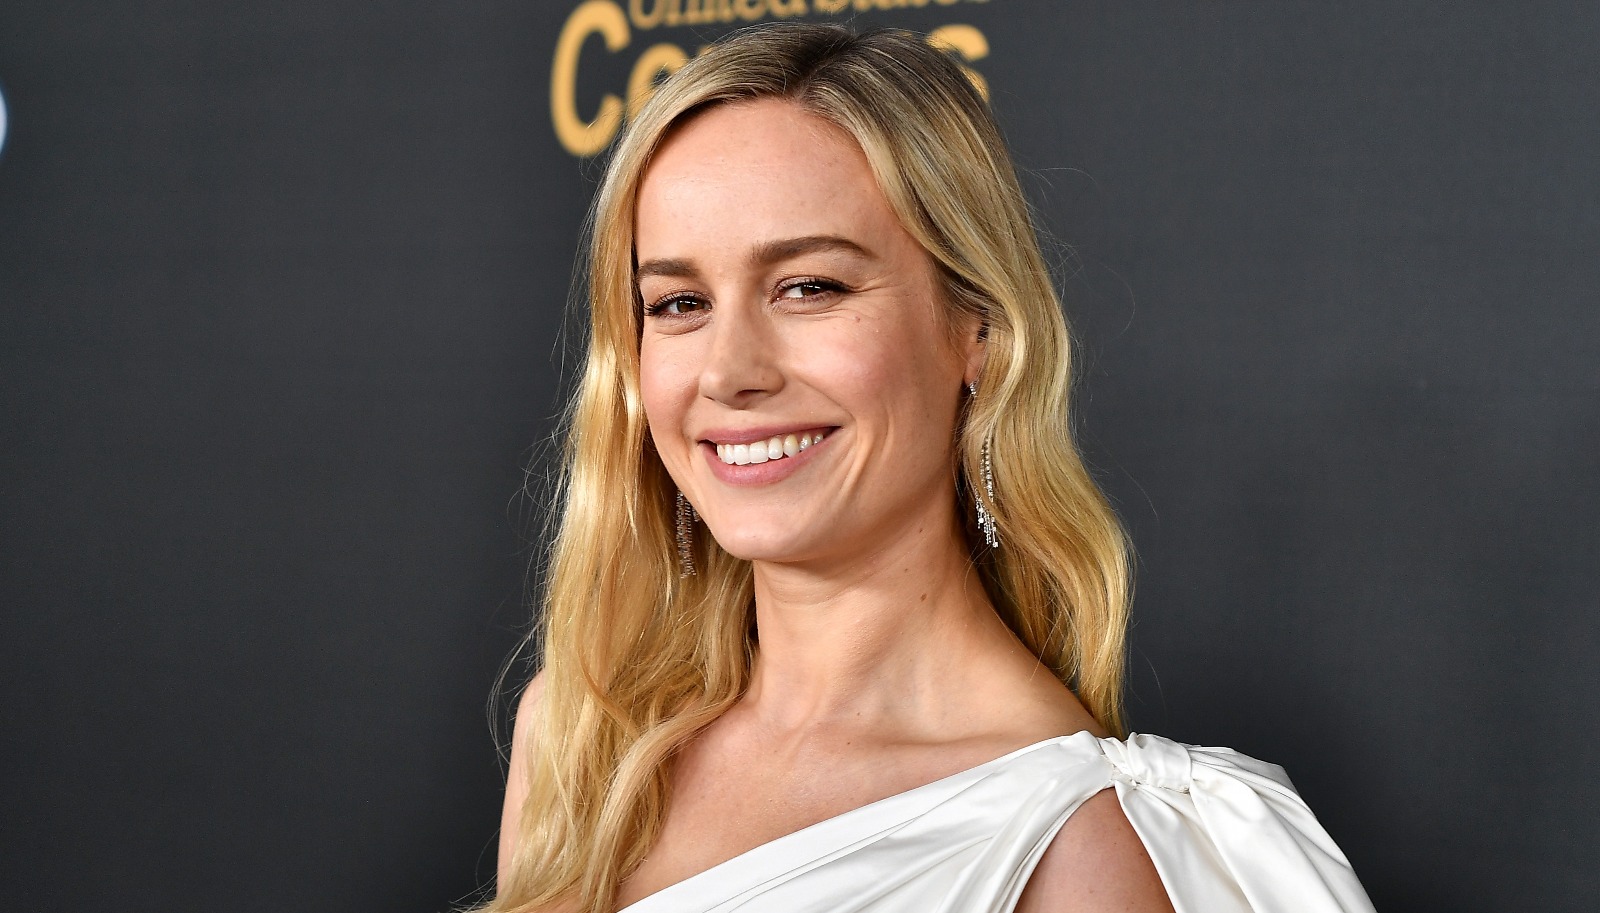 Brie Larson Shares Tribute to ‘The Marvels’ Co-stars